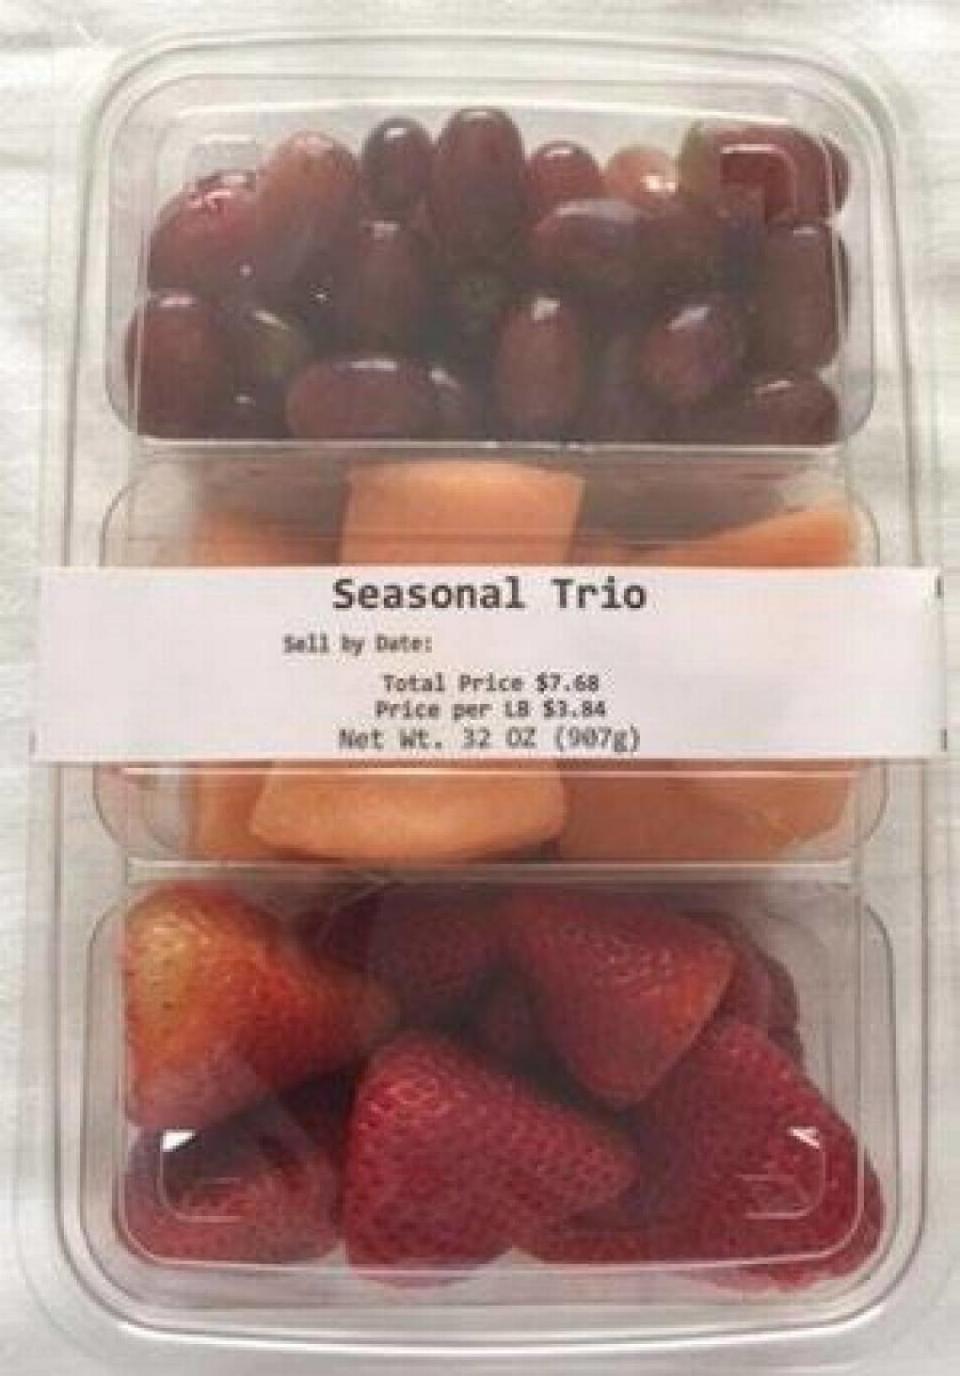 A Seasonal Trio package is among those recalled at Walmart due to listeria concerns in October 2020.